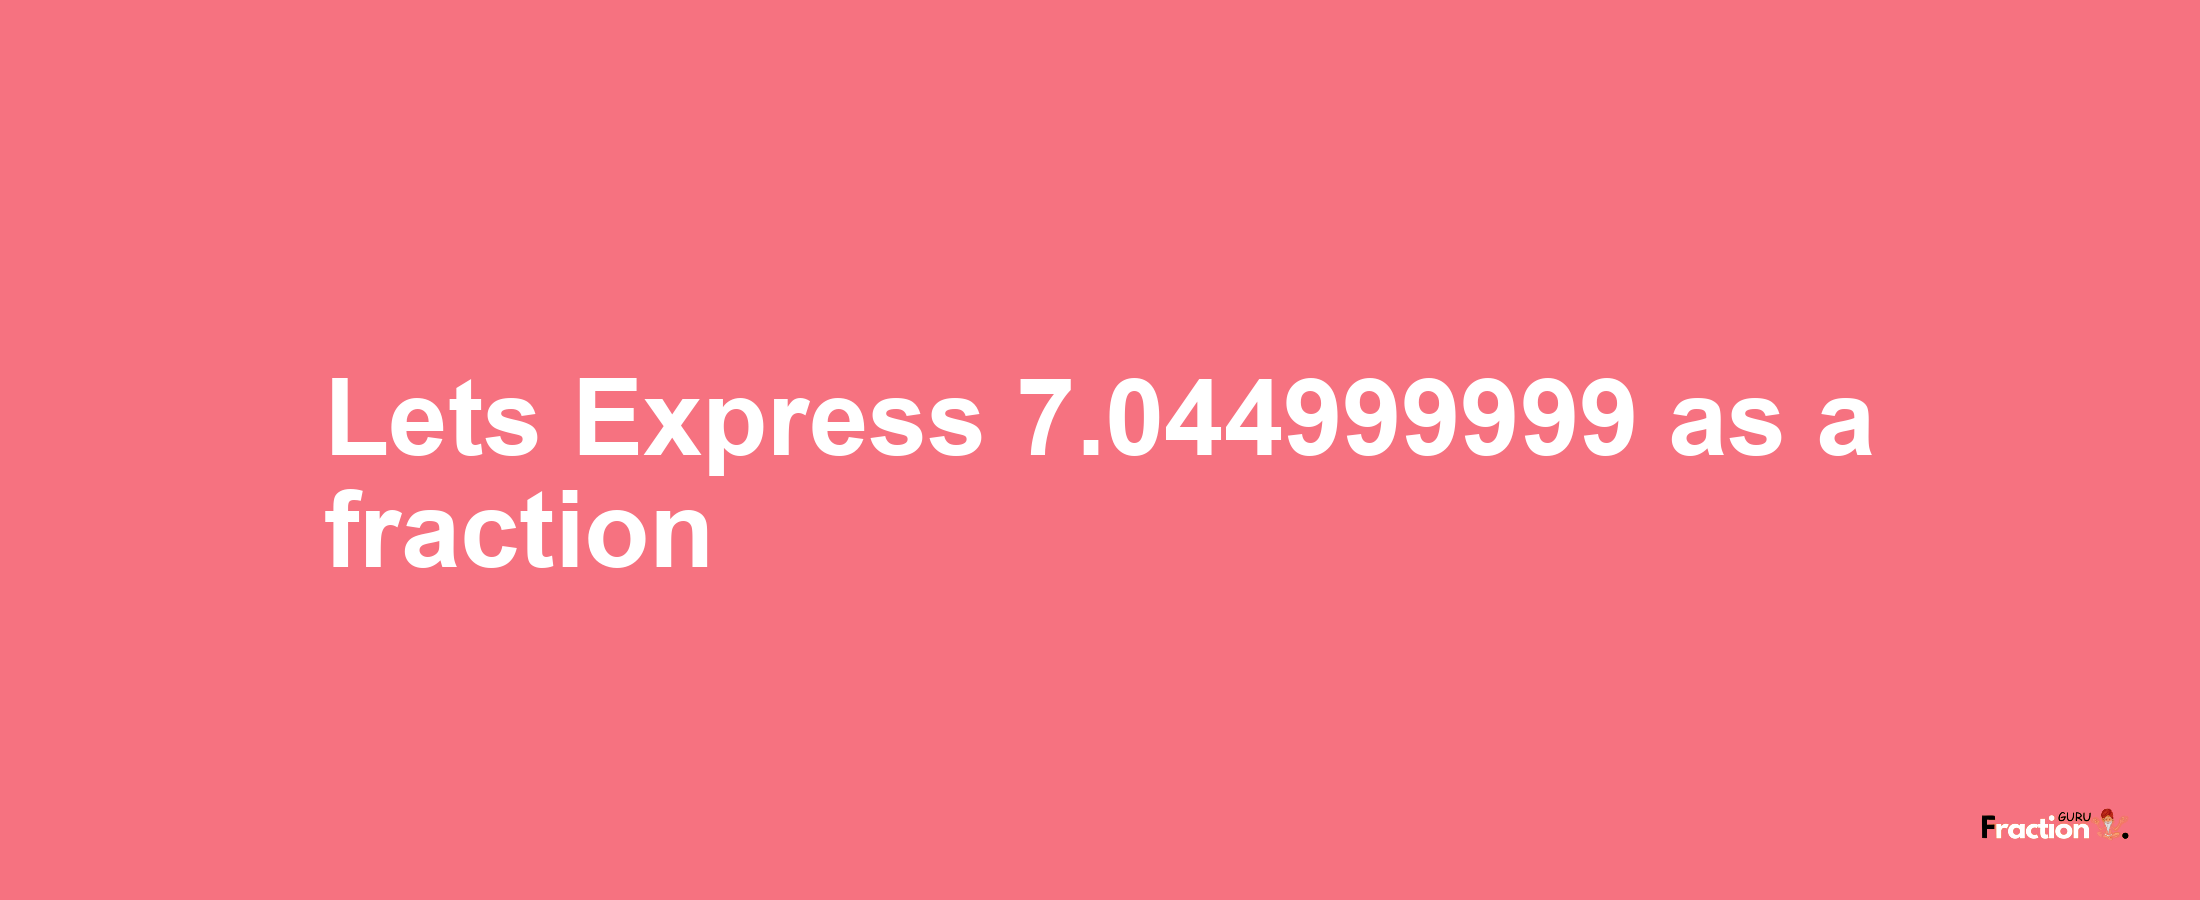 Lets Express 7.044999999 as afraction